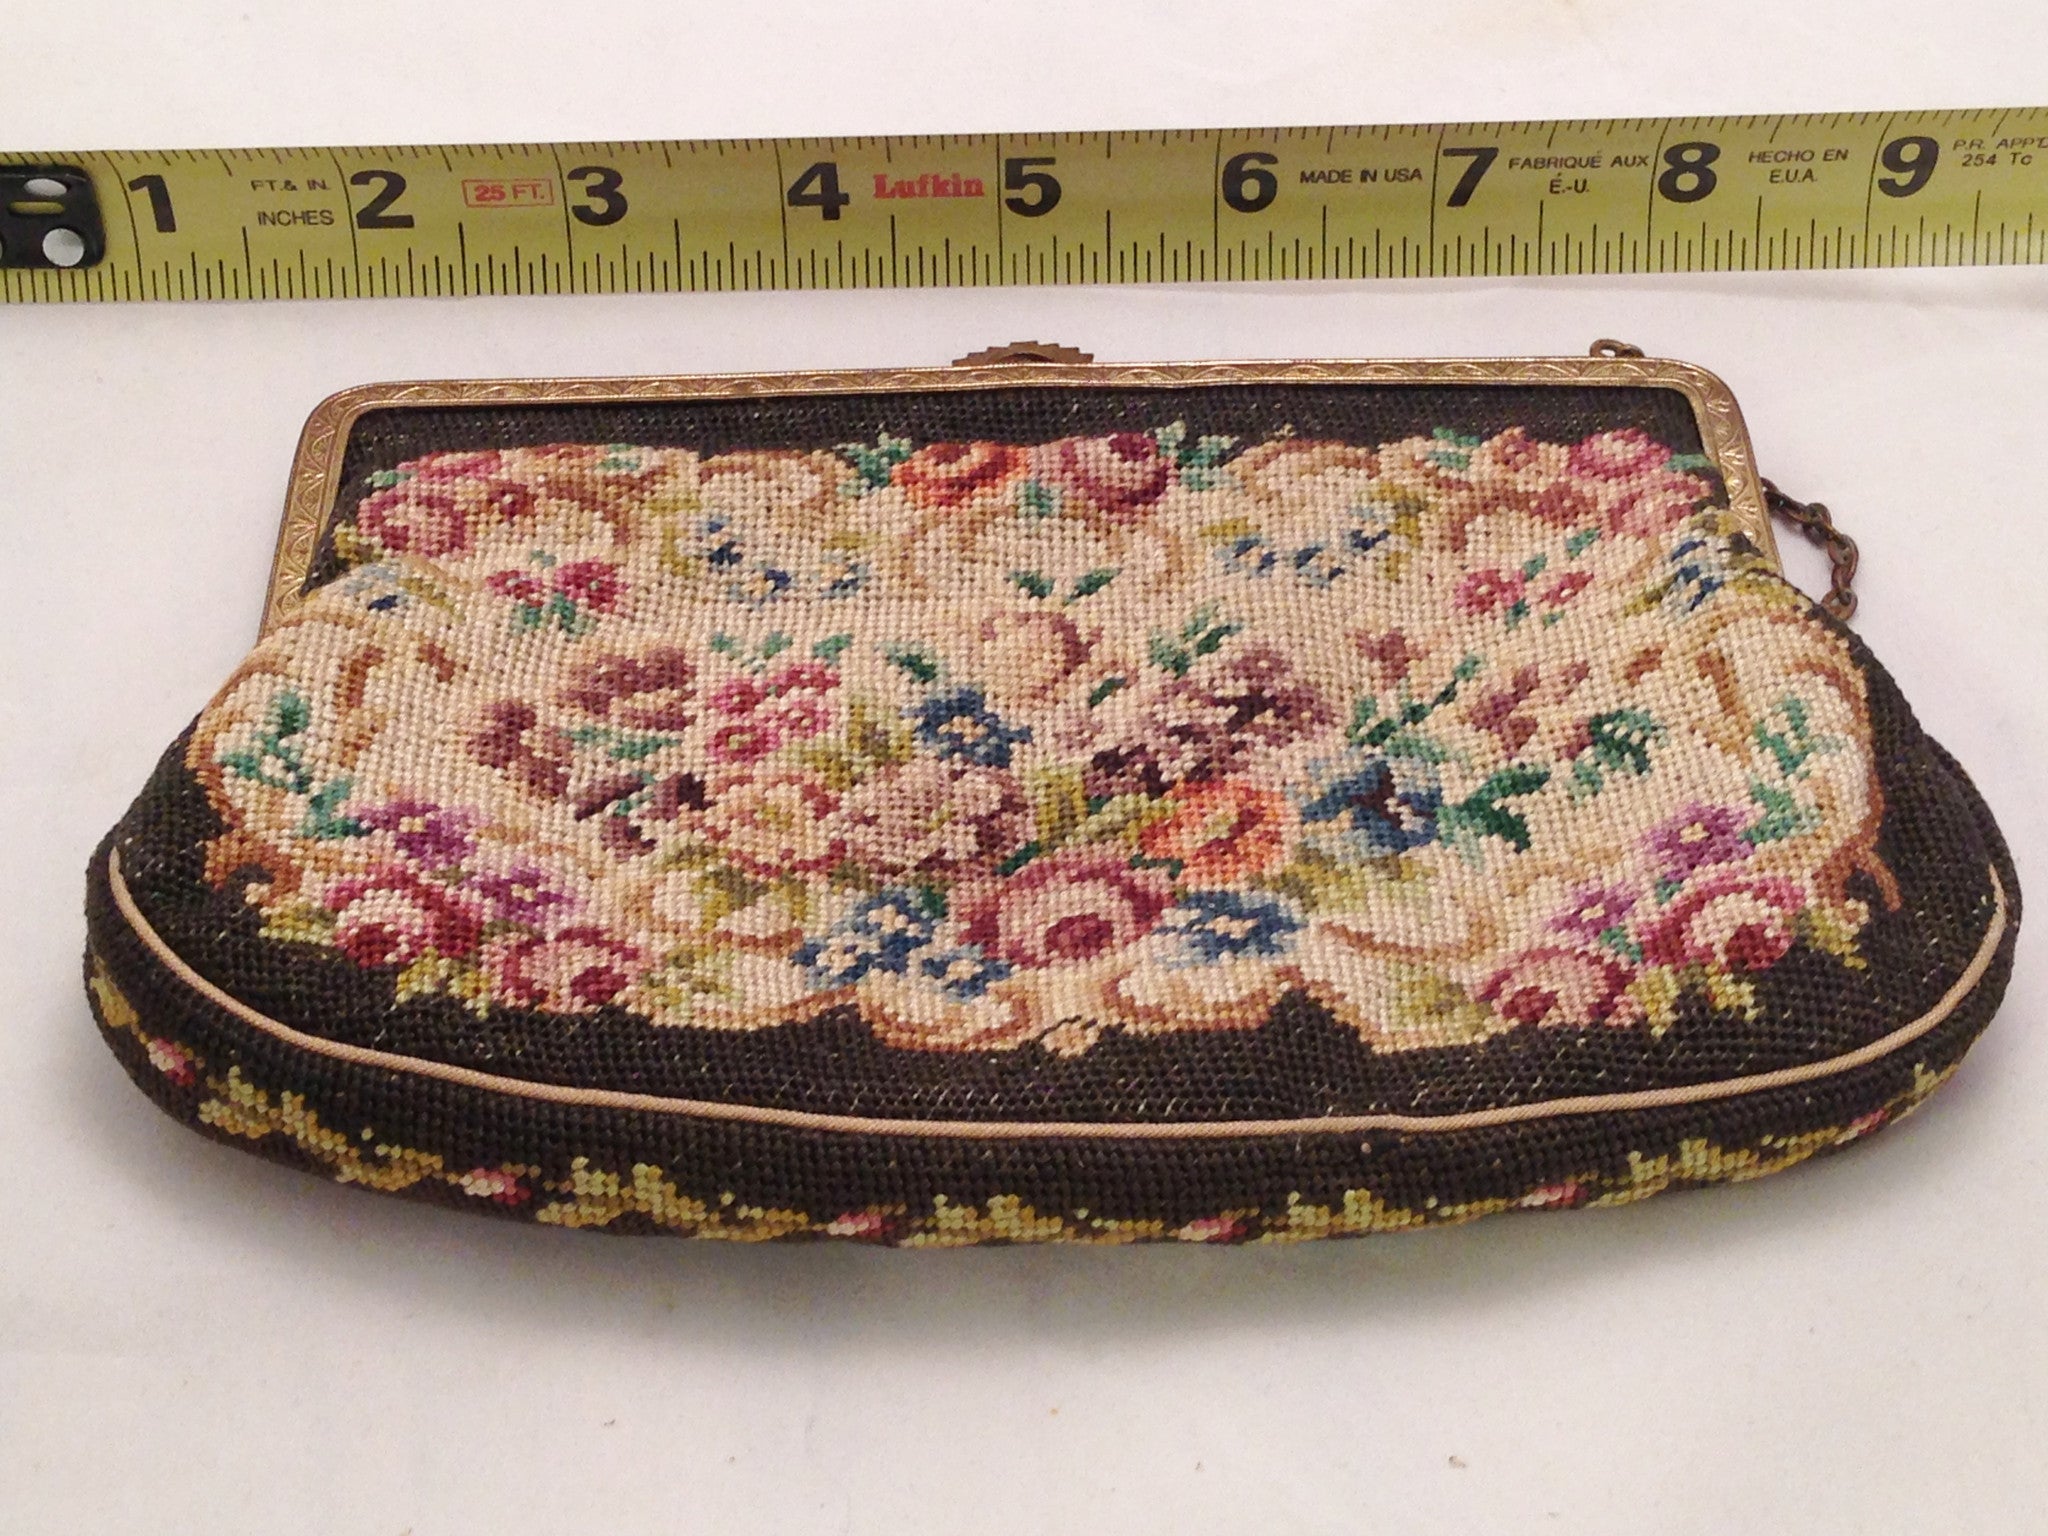 Antique Petit Point Needlepoint Tapestry Handbag – Hers and His Treasures